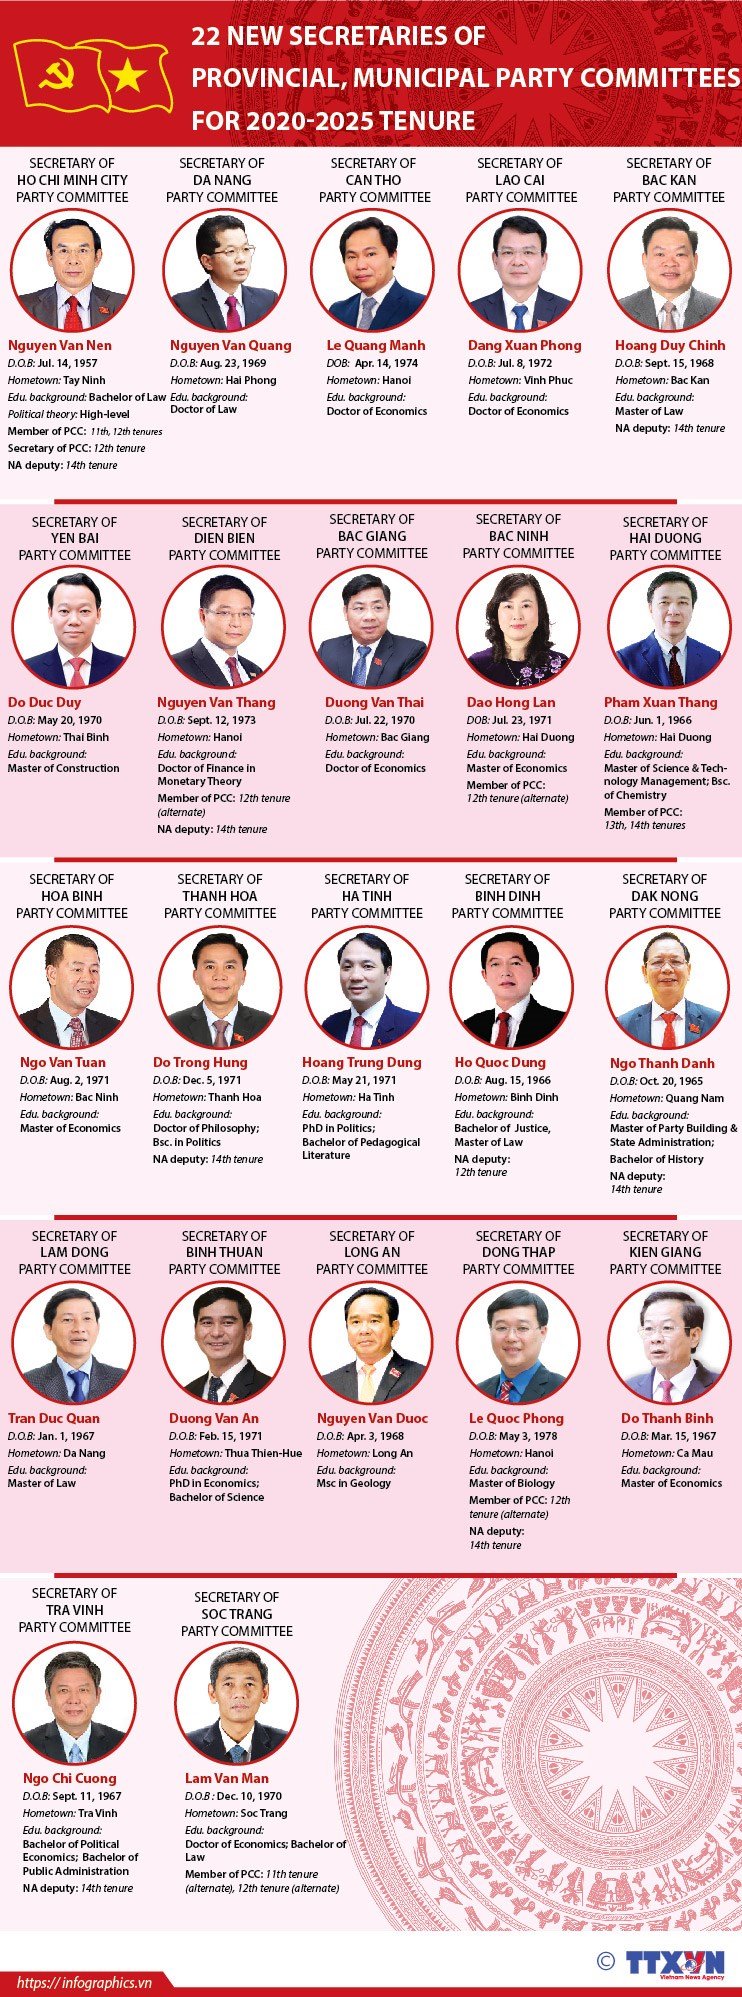 22 new Secretaries of provincial, municipal Party Committees for 2020-2025 tenure hinh anh 1